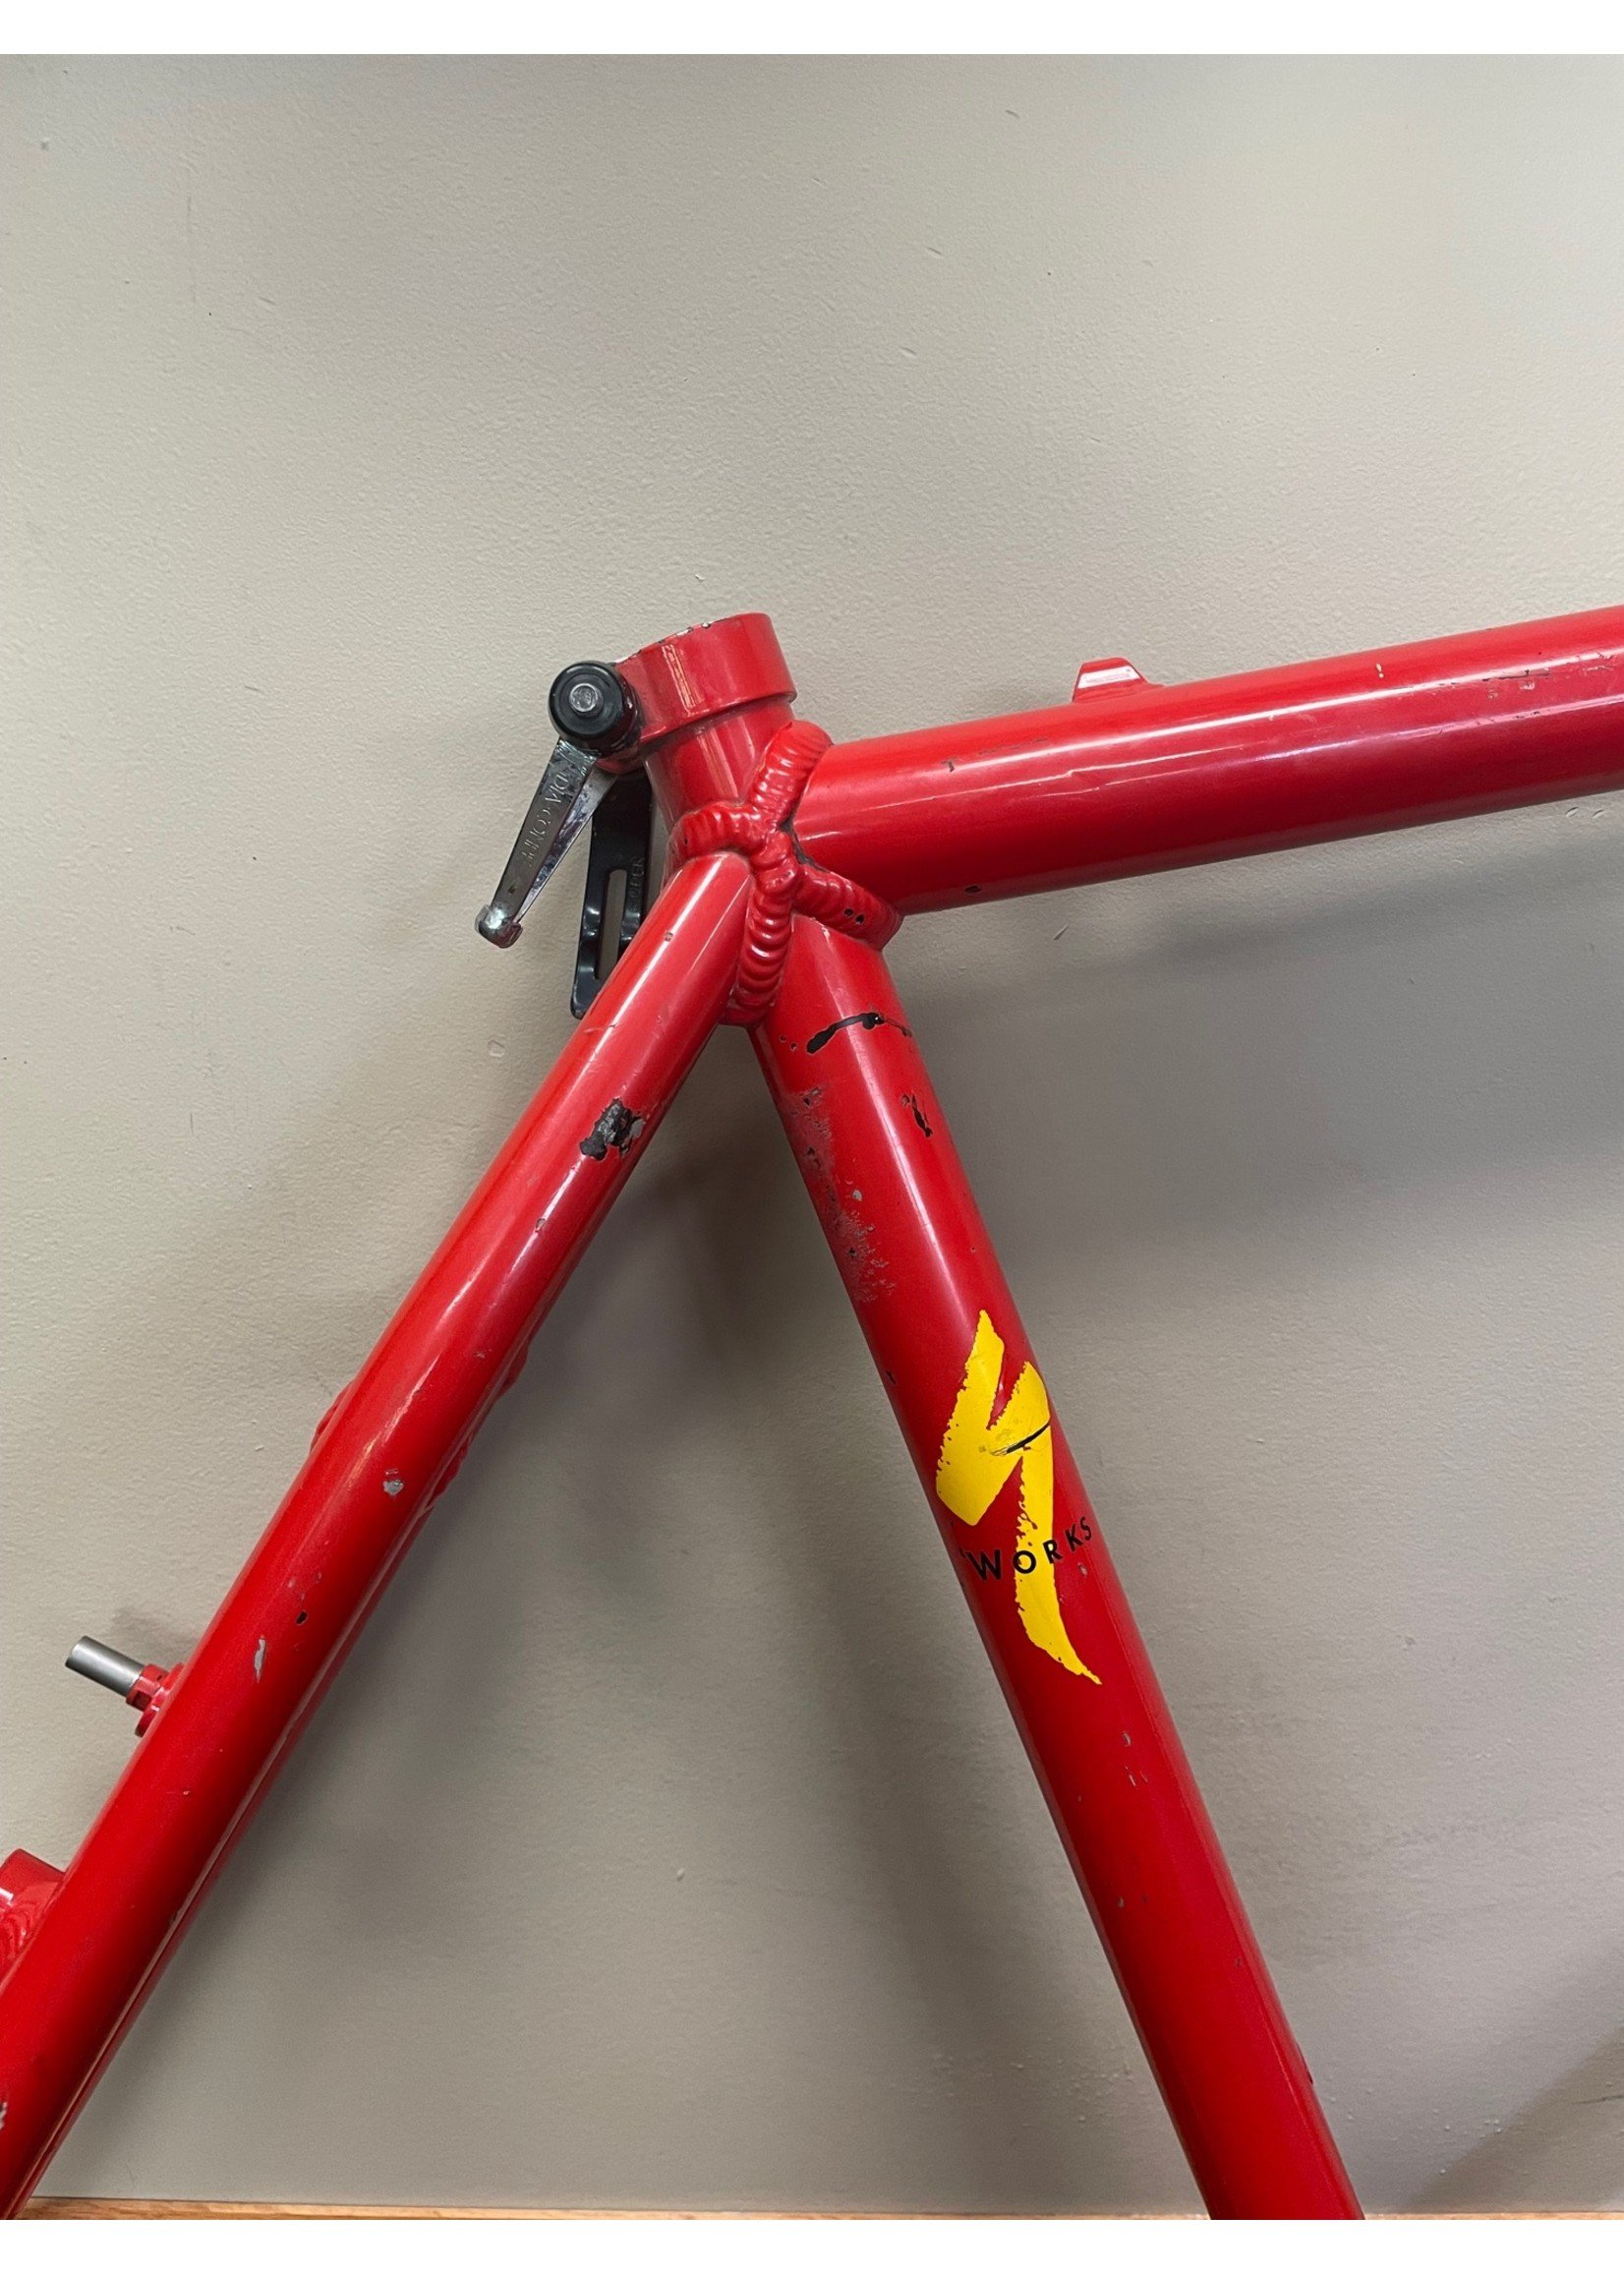 Specialized S Works M2 Frame - Gringineer Cycles